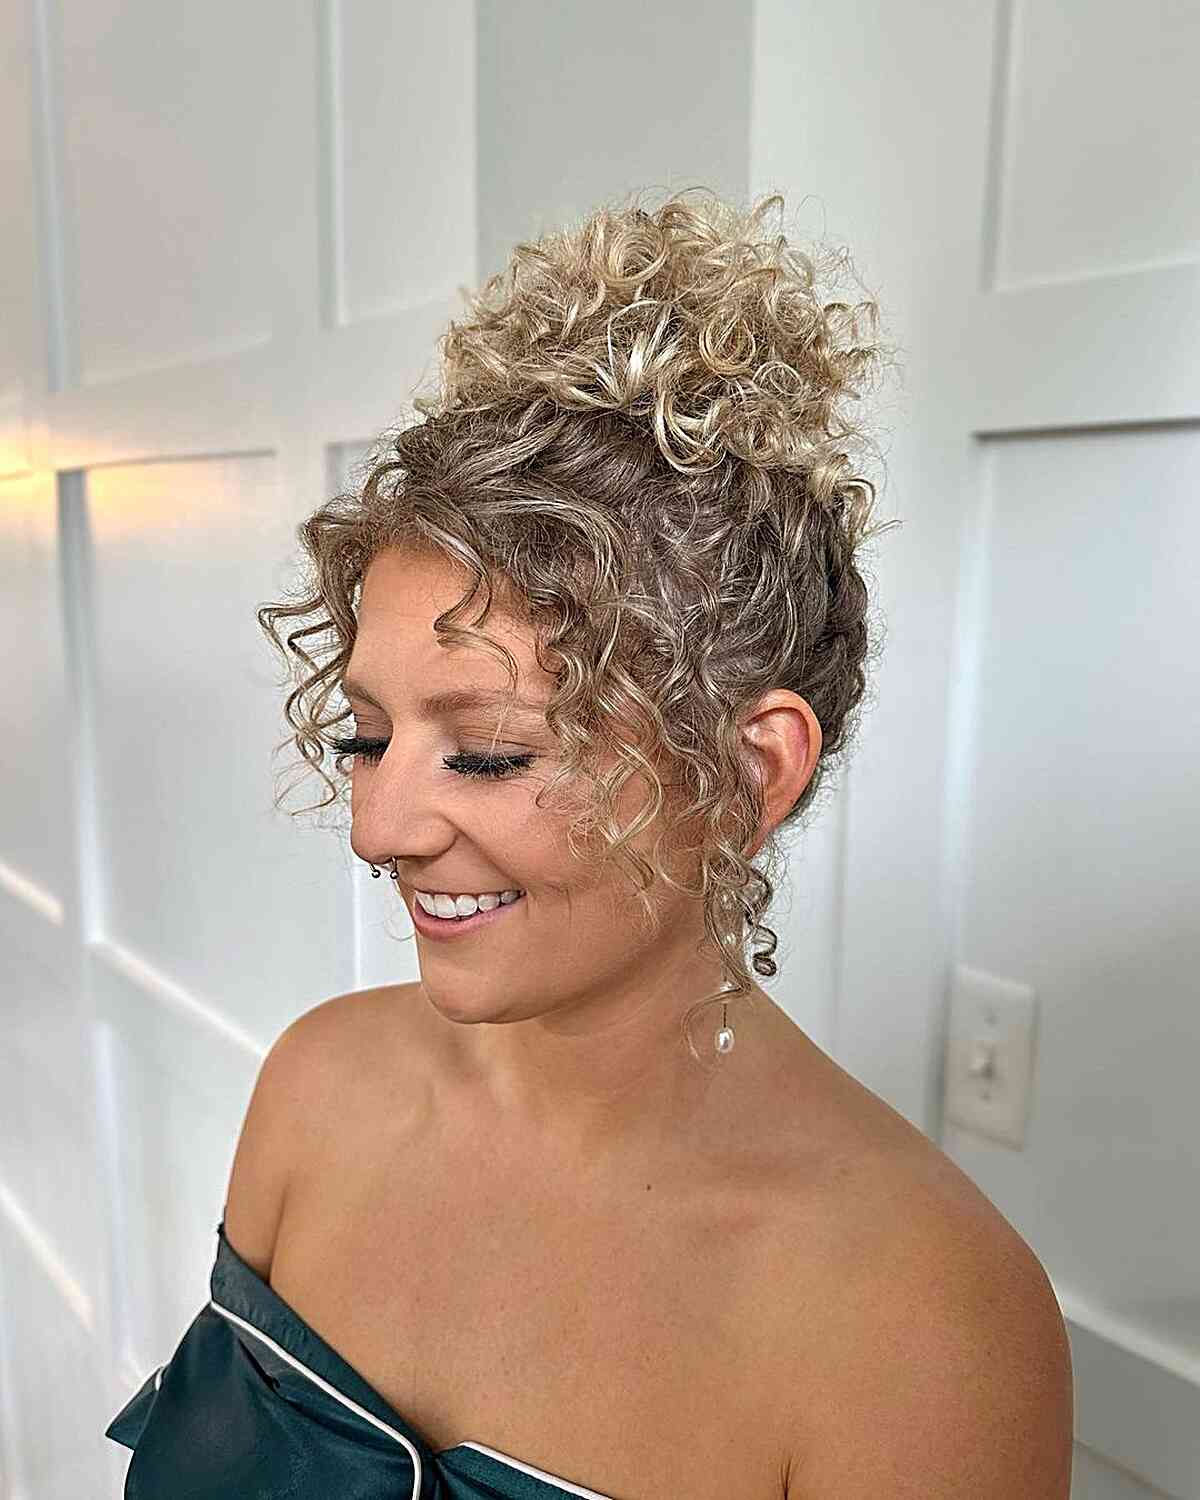 Cute Curly Updo with Tendrils for girls attending a formal event